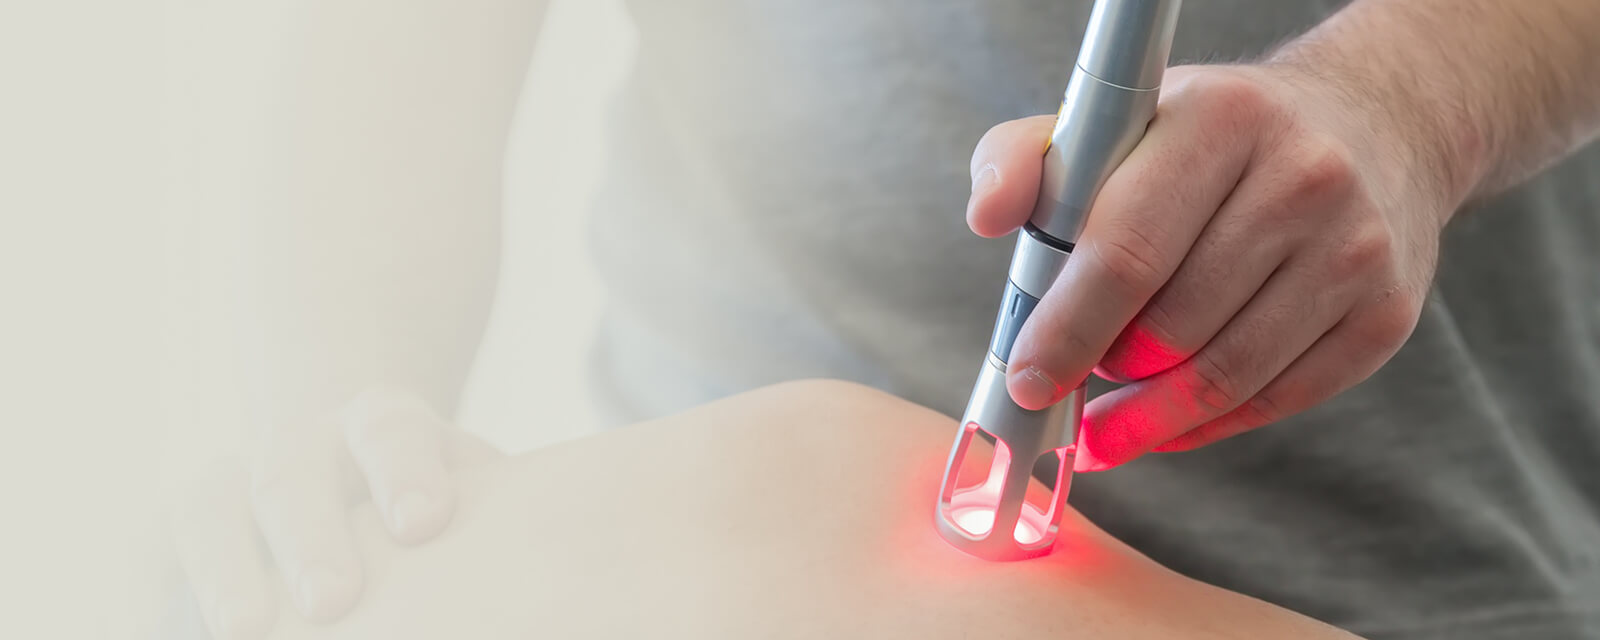 Laser therapy wand